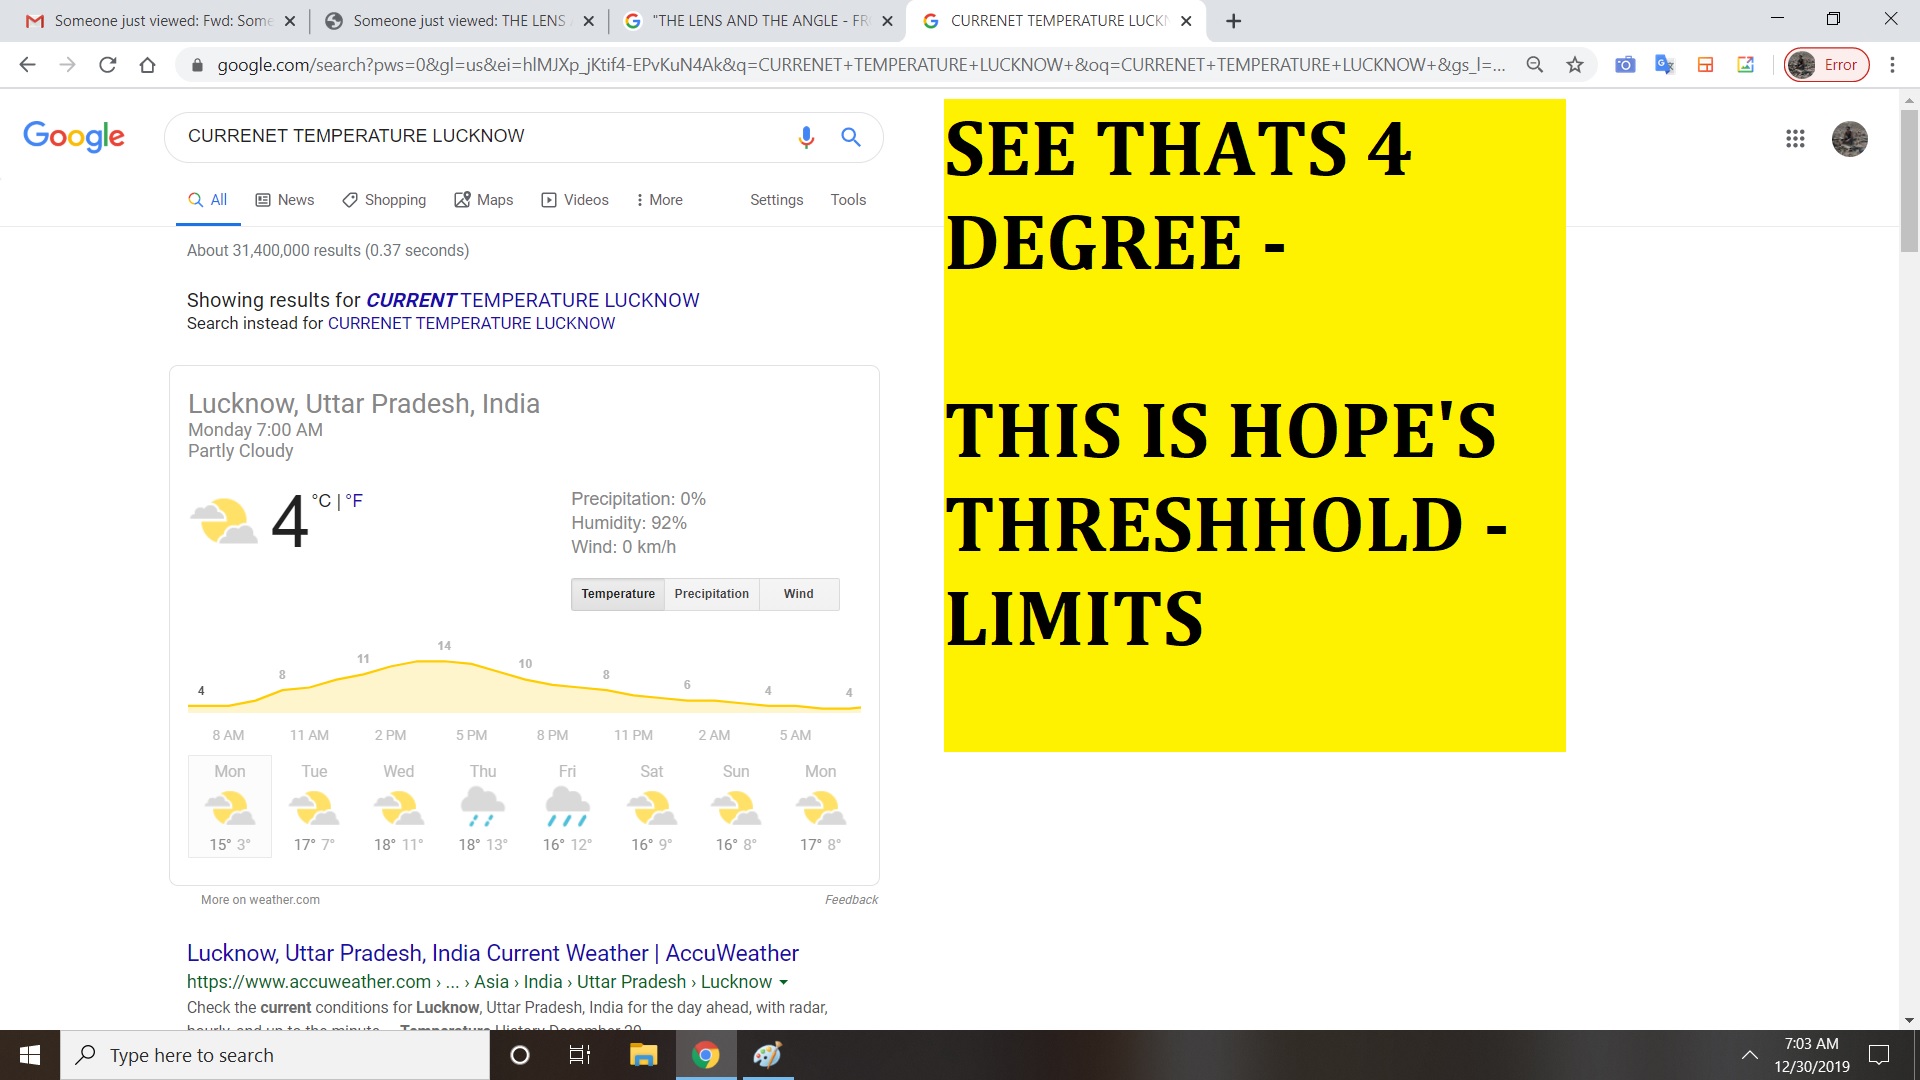 SO ITS 4 DEGRESS NOW IN LUCKNOW